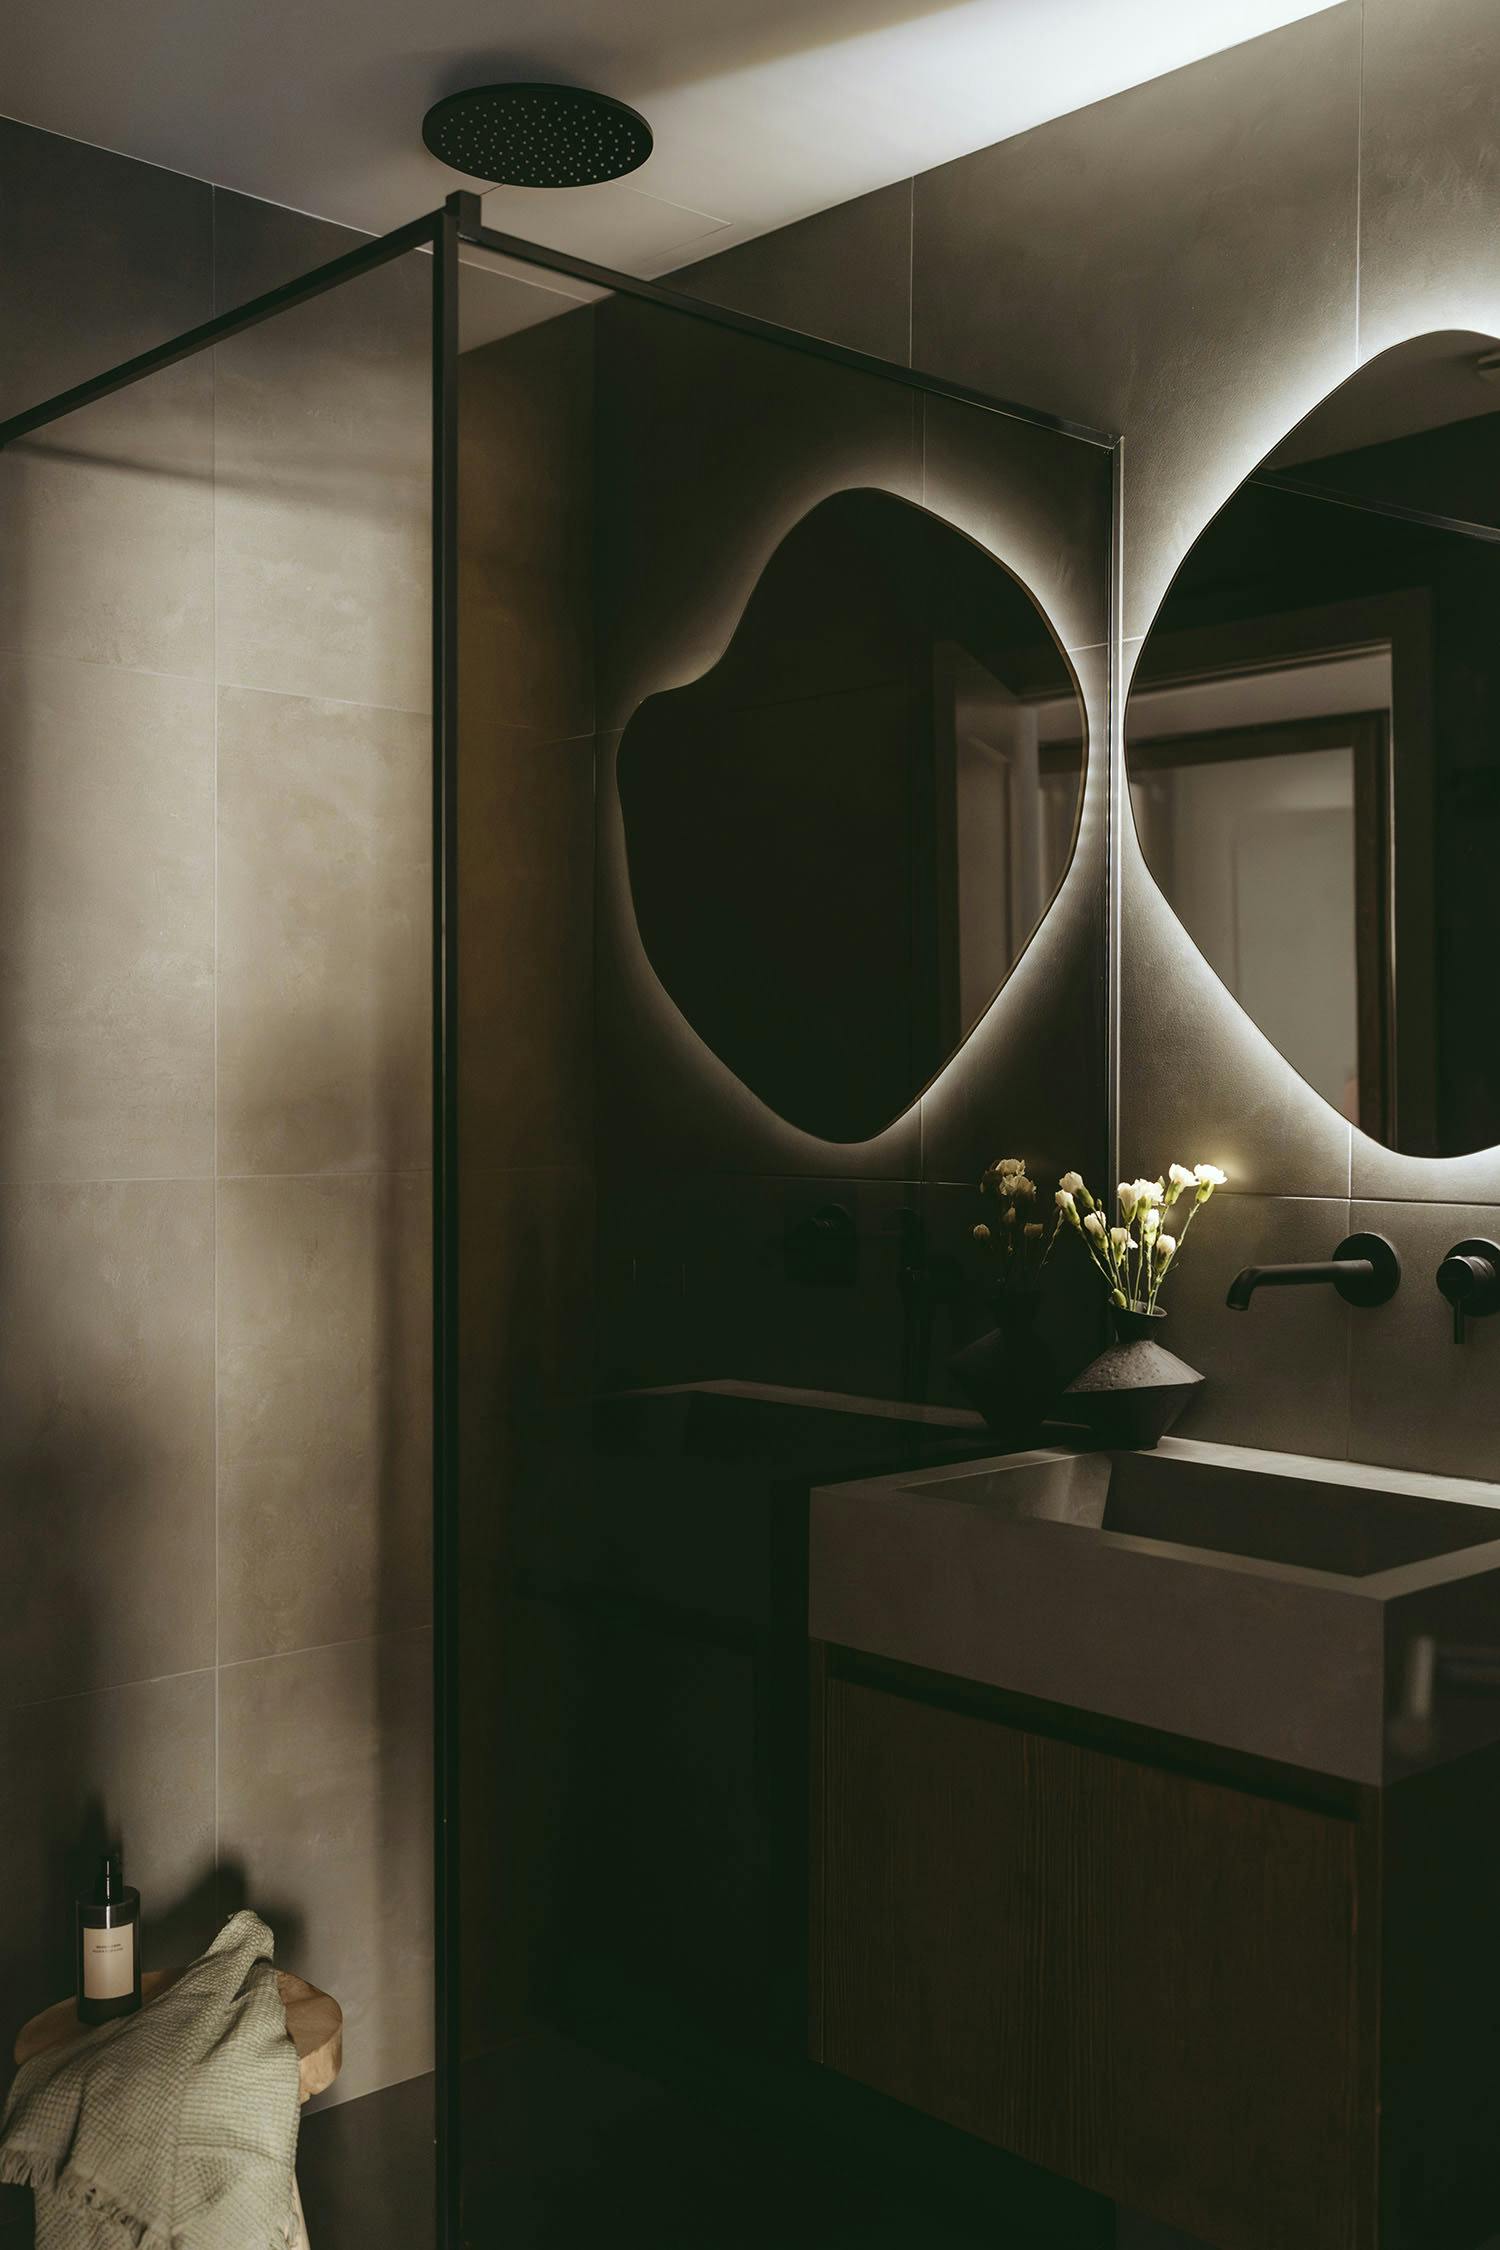 The image features a bathroom with a large mirror, sink, and a vase of flowers.